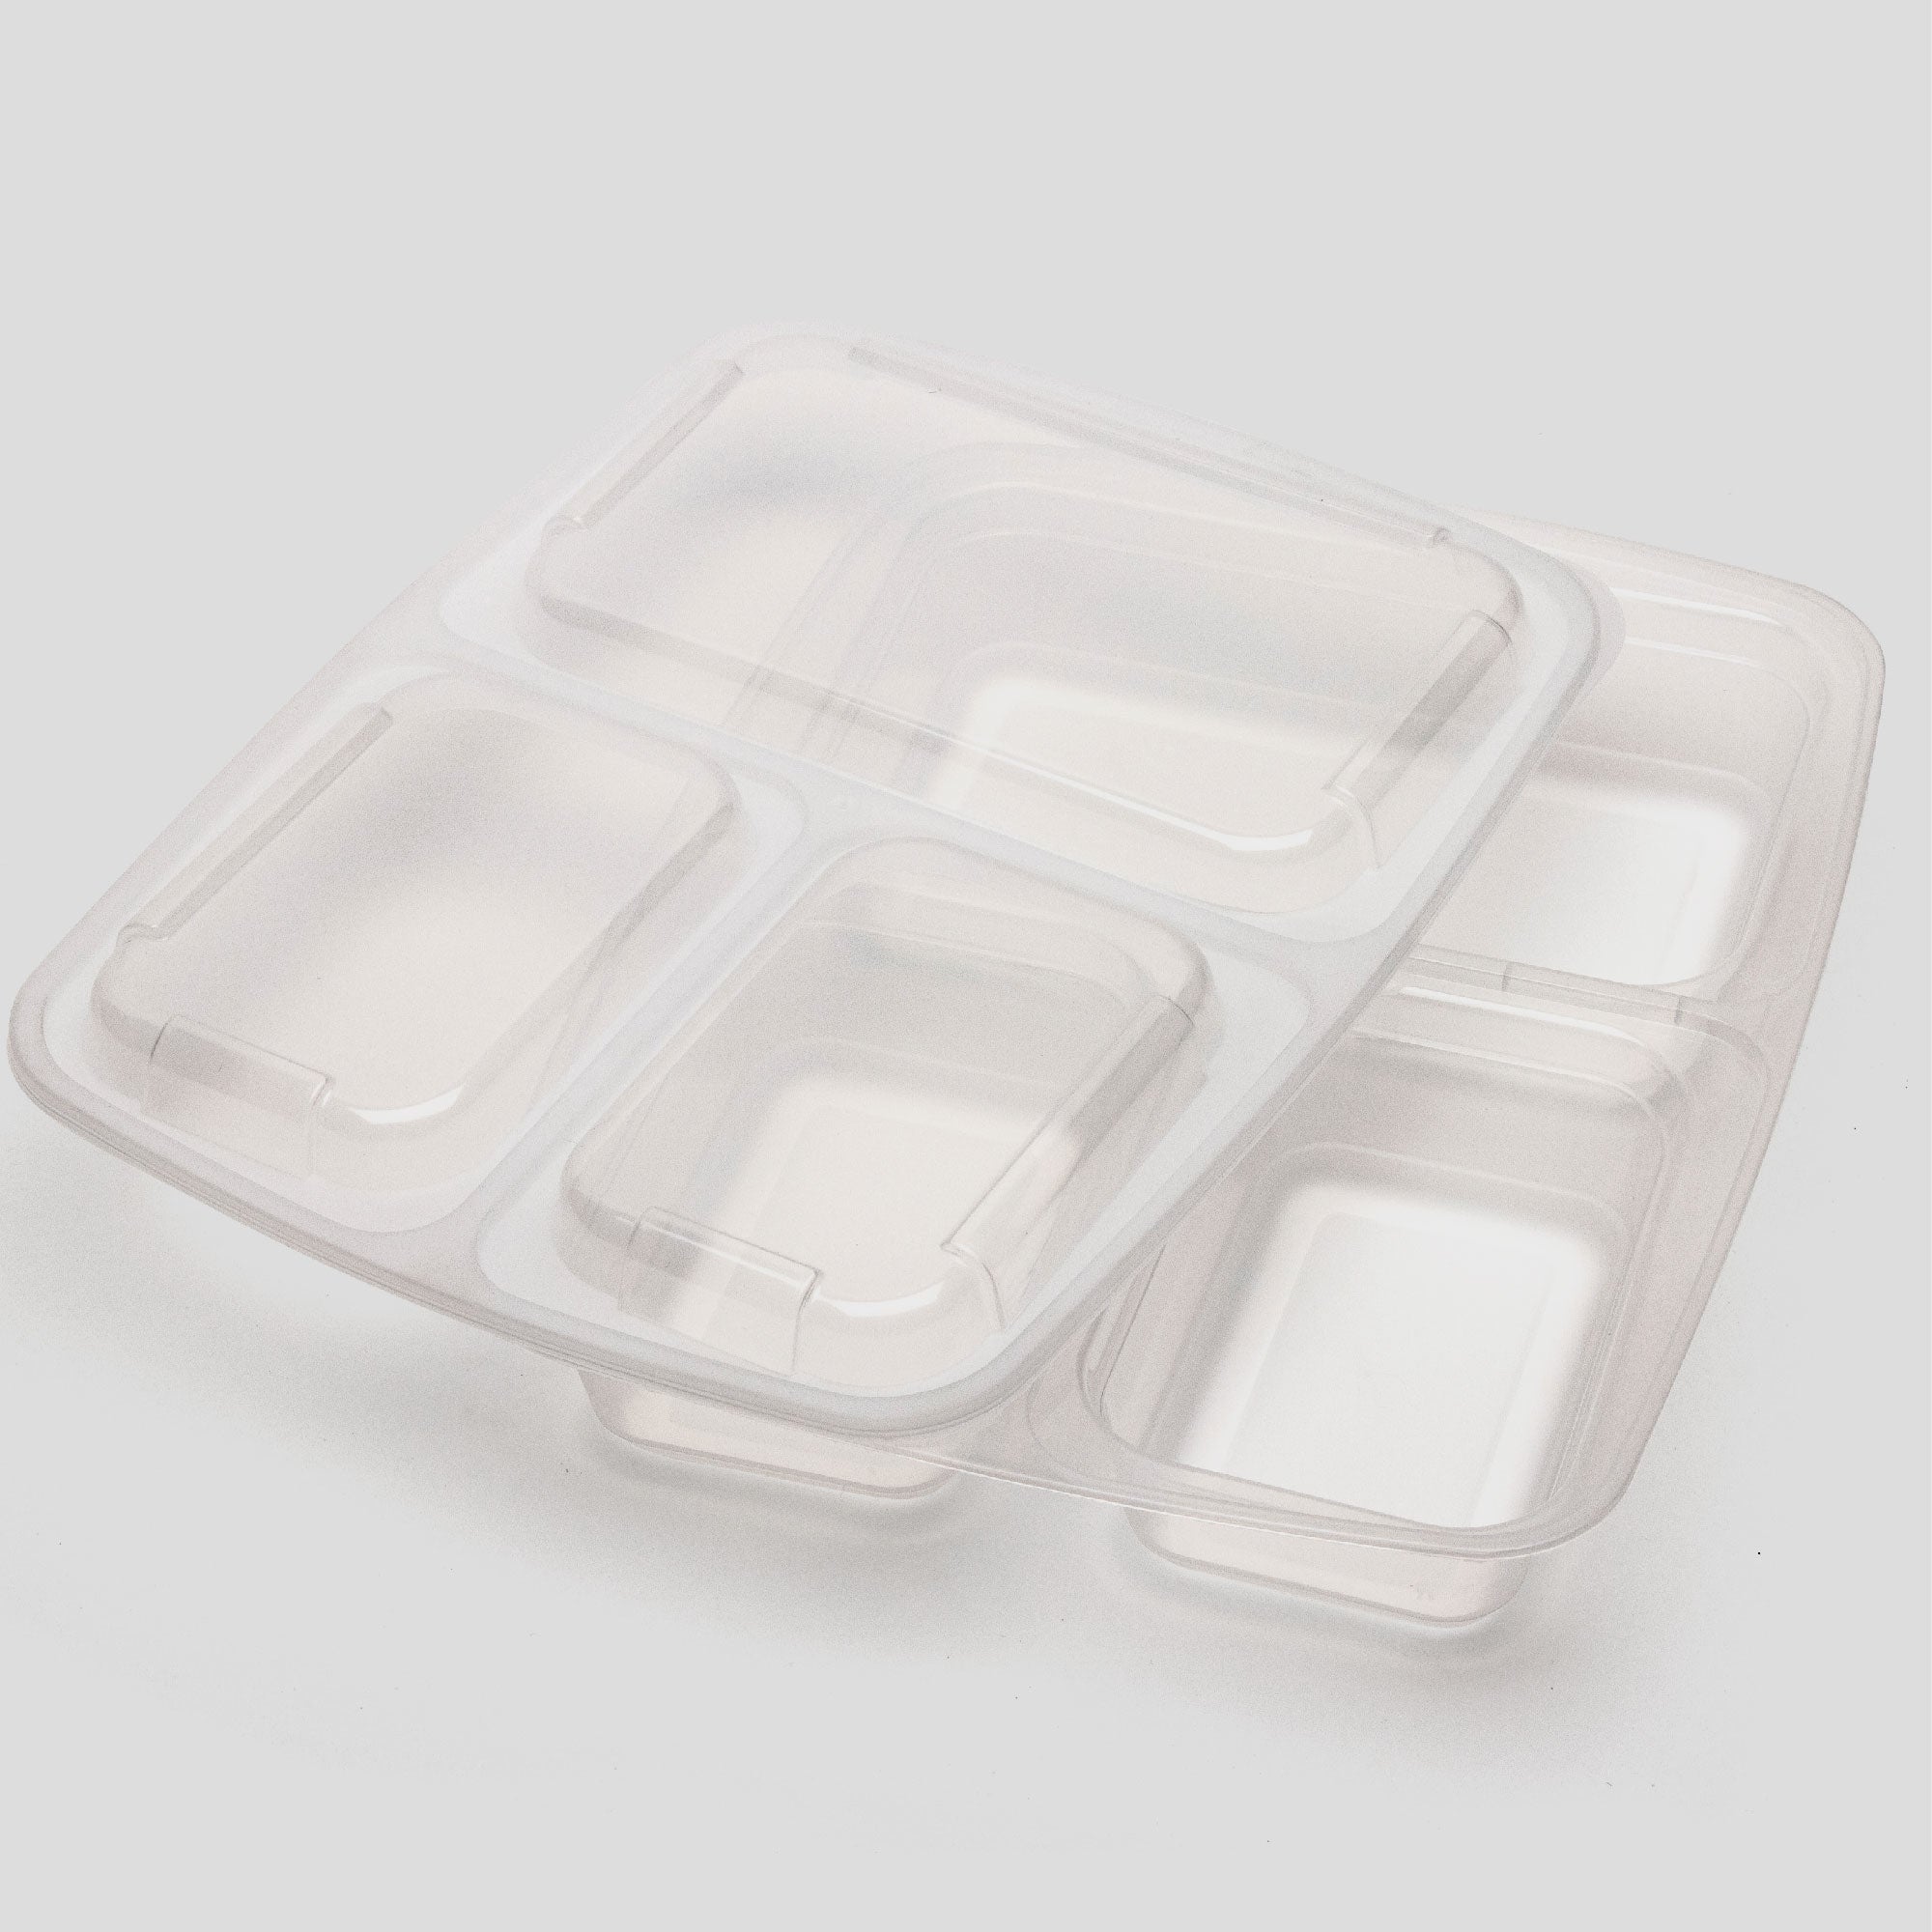 Bento 7 Day Meal Prep Containers